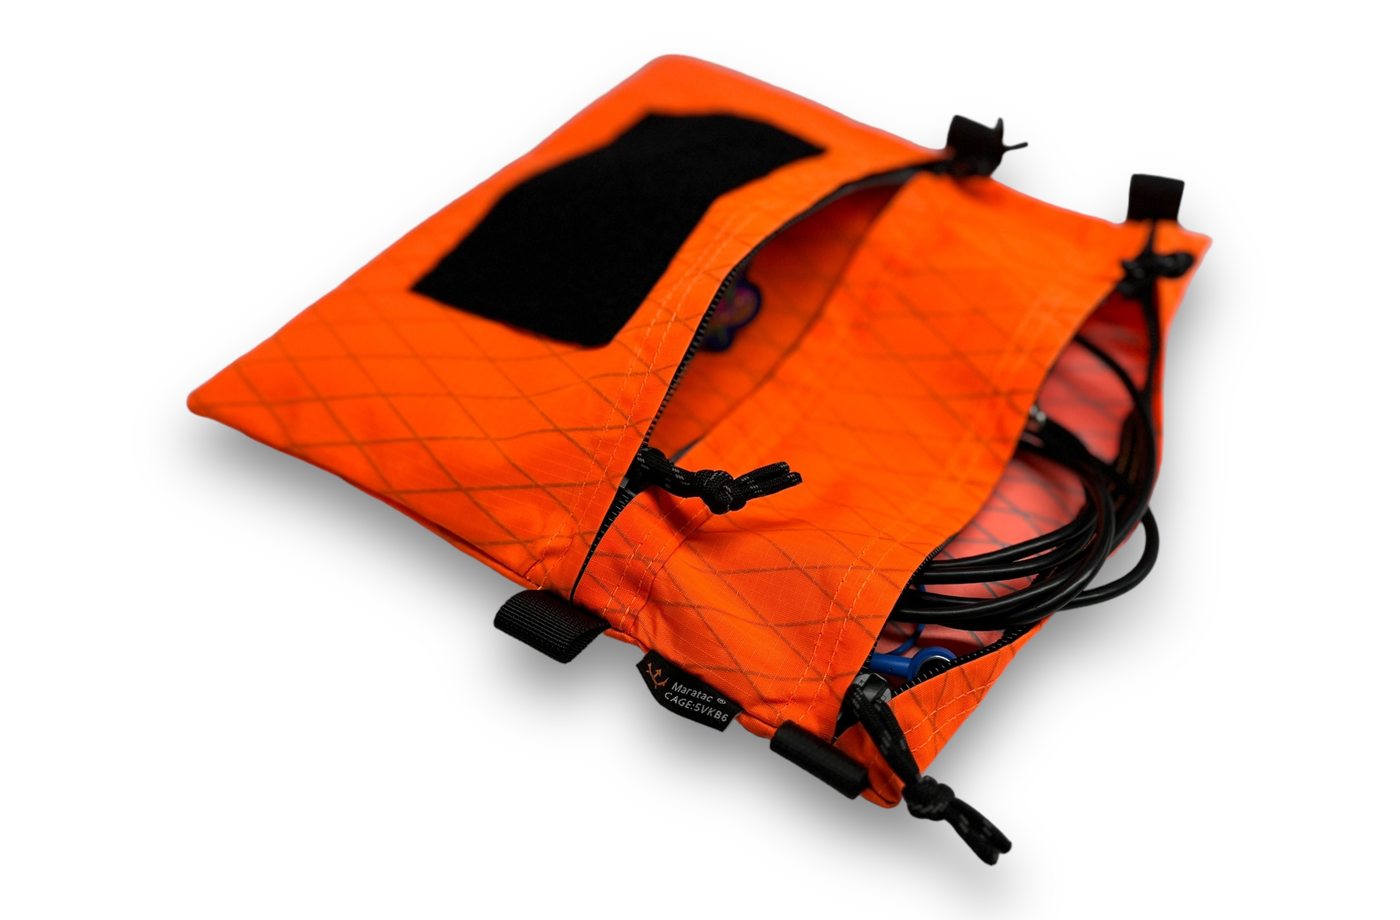 SAPX - Special Applications Pouch XPAC® By Maratac®